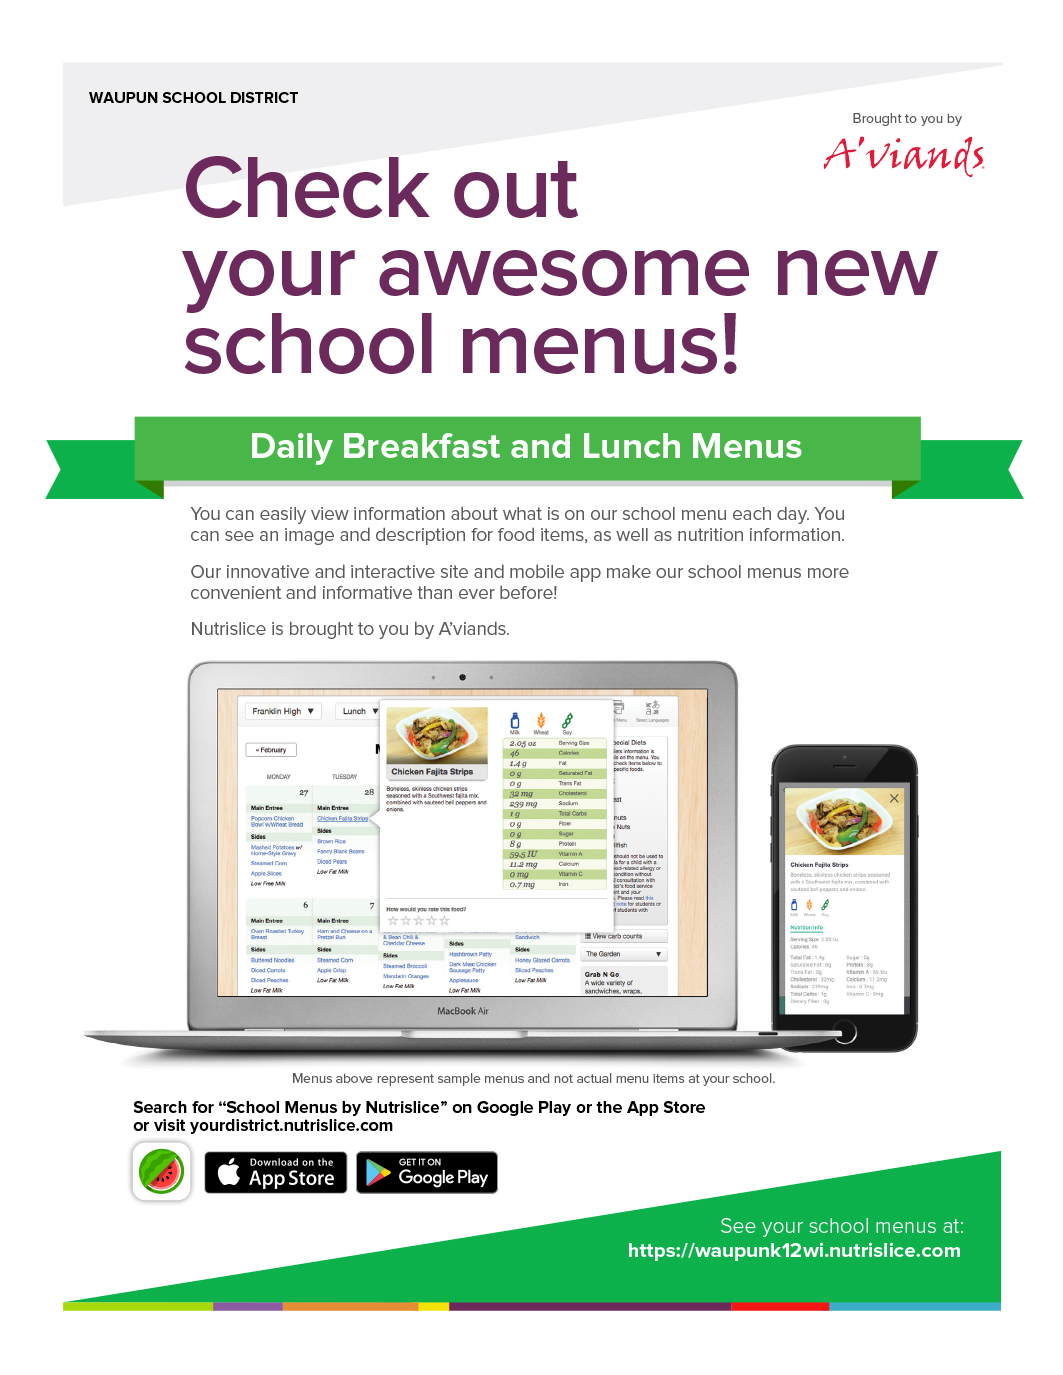 Check out your awesome new school menus! - app info